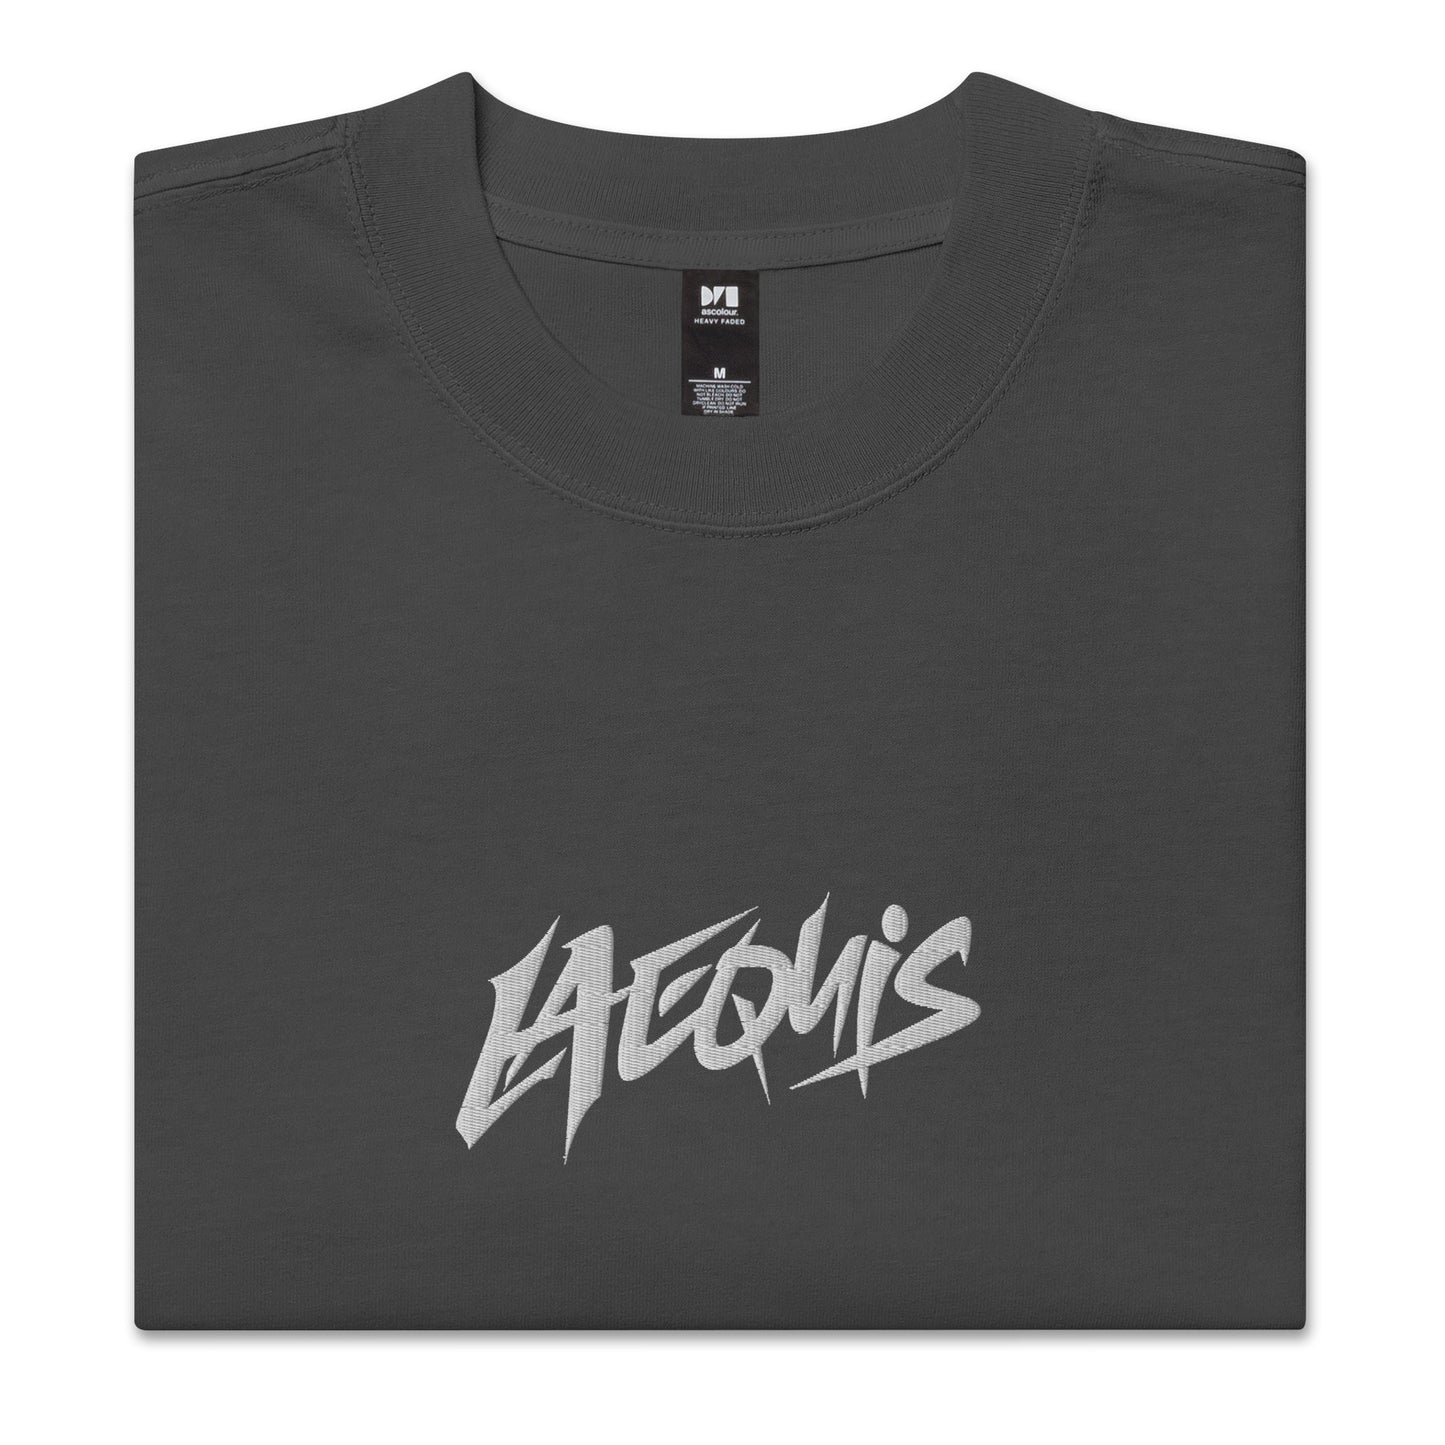 La Equis Embroidered Oversized Tee